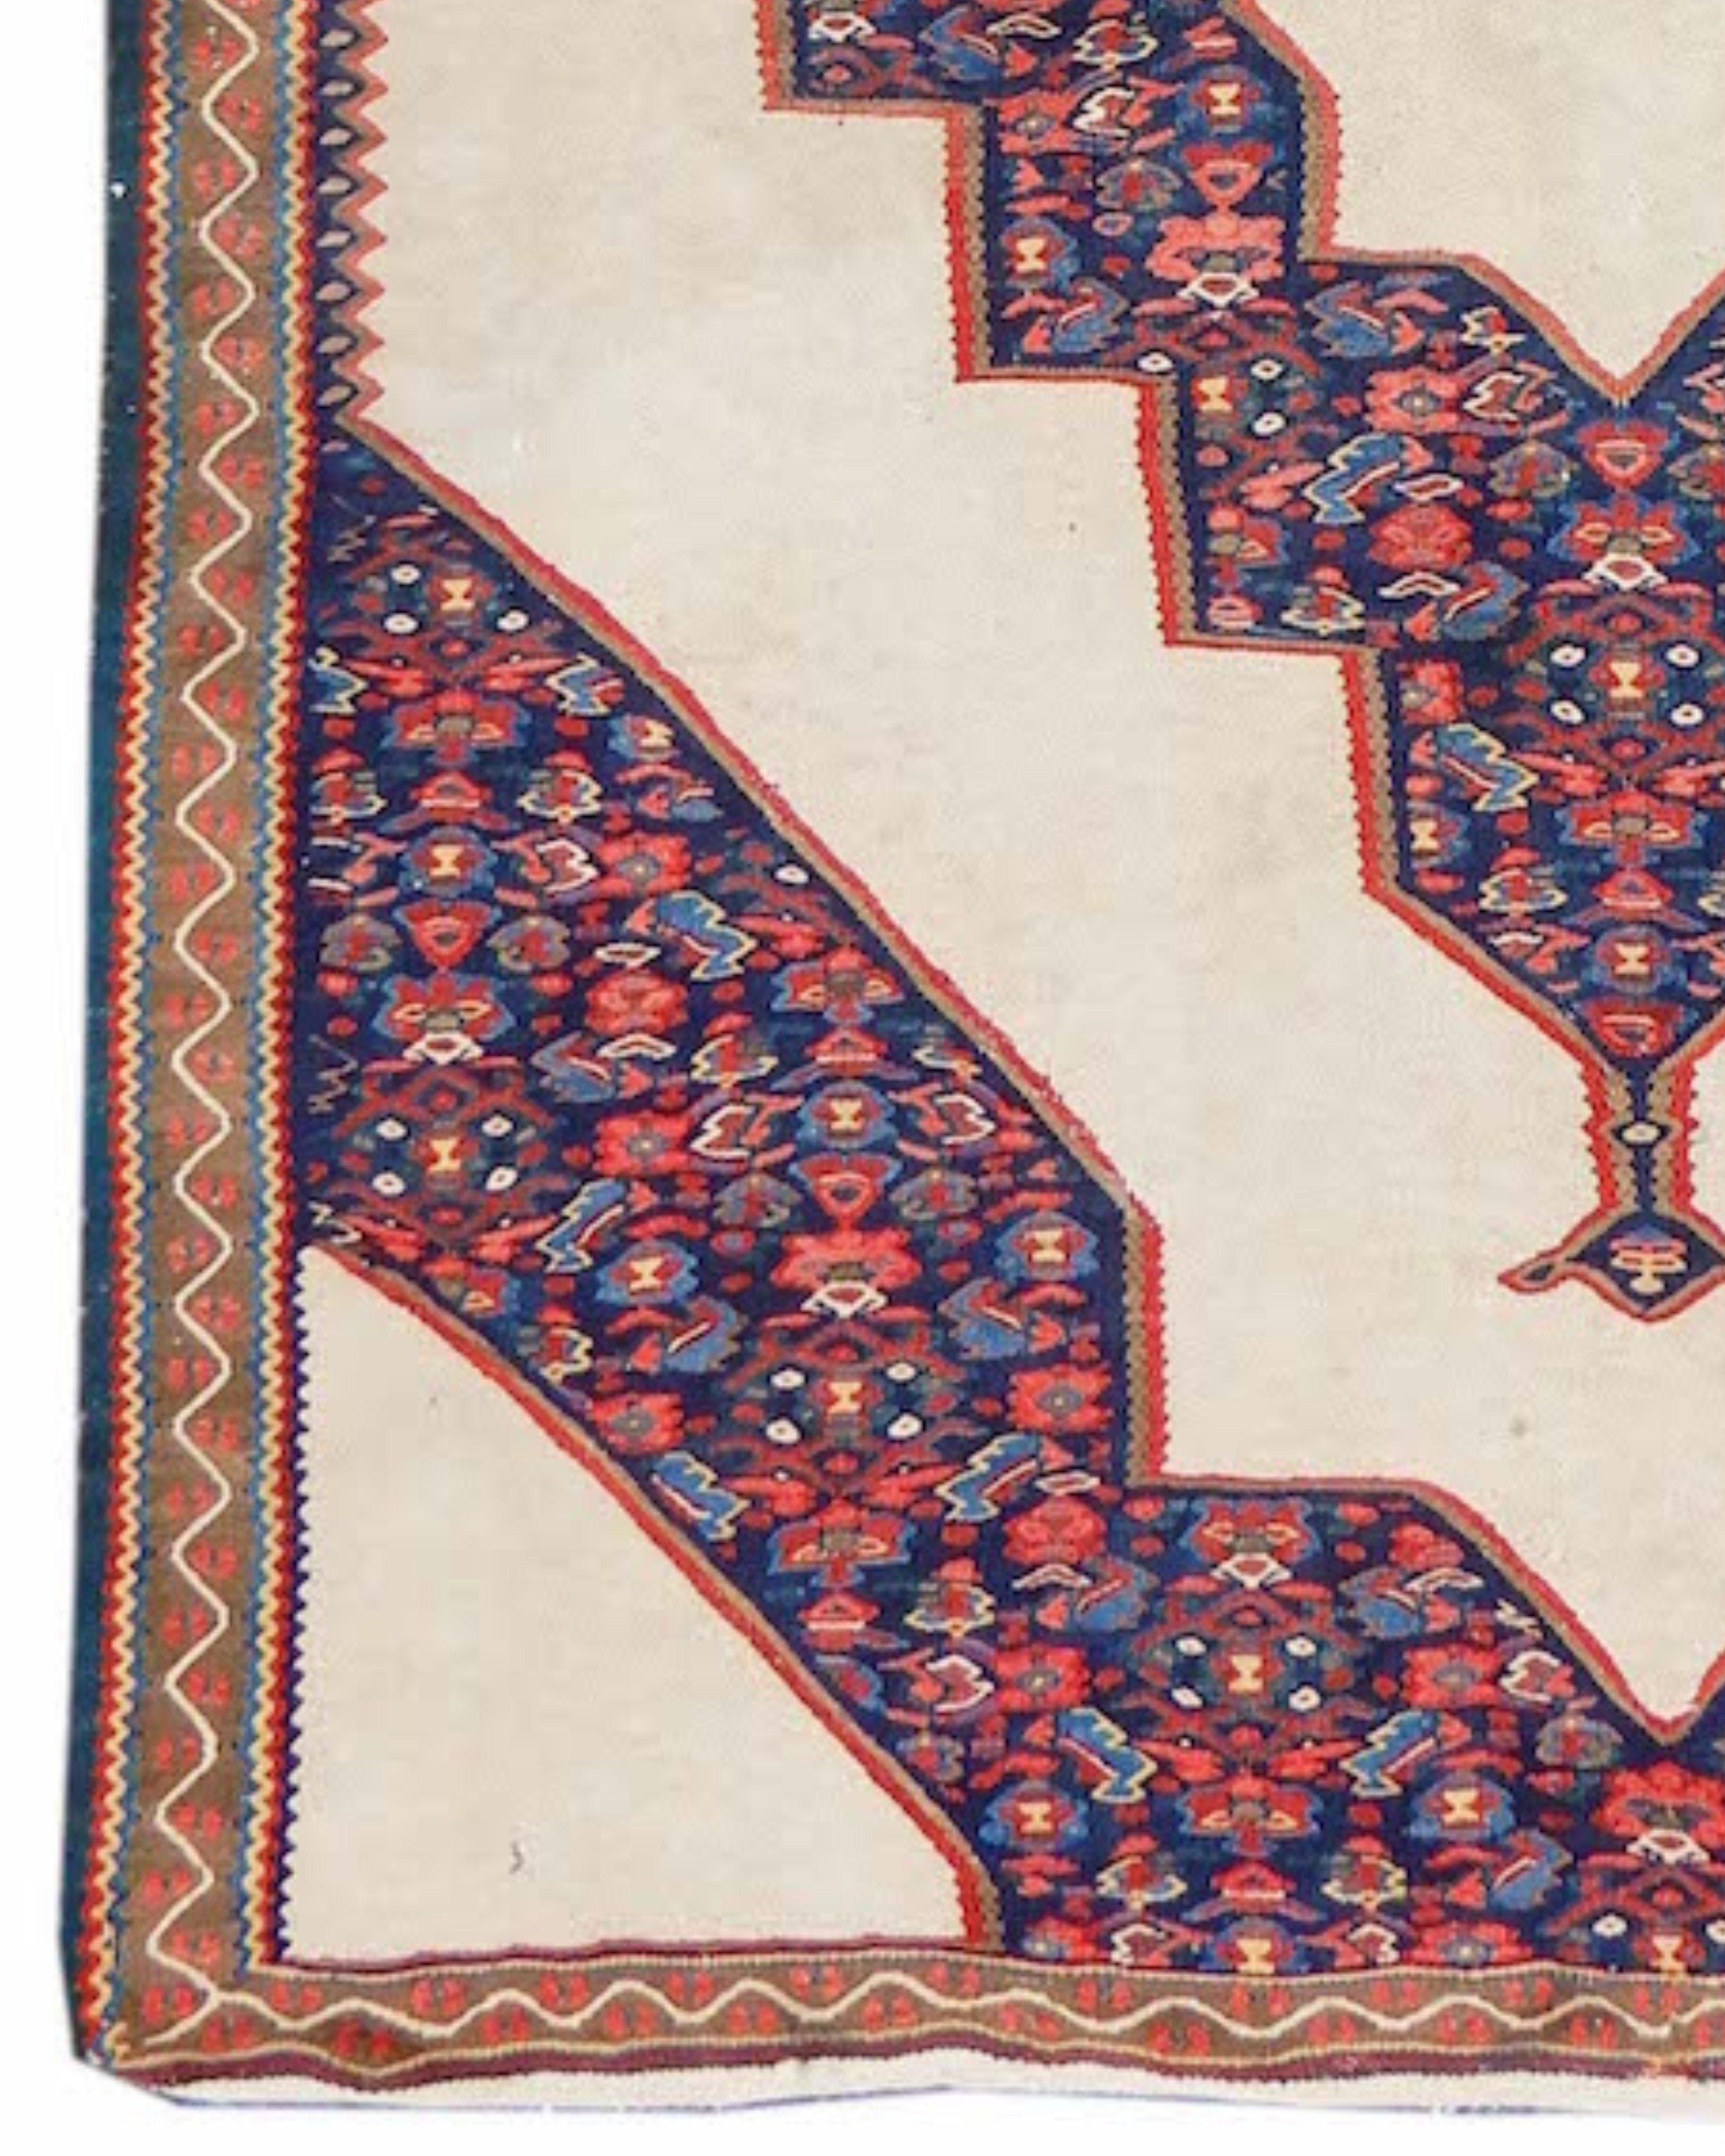 Hand-Knotted Senneh Kilim Rug, c. 1900 For Sale